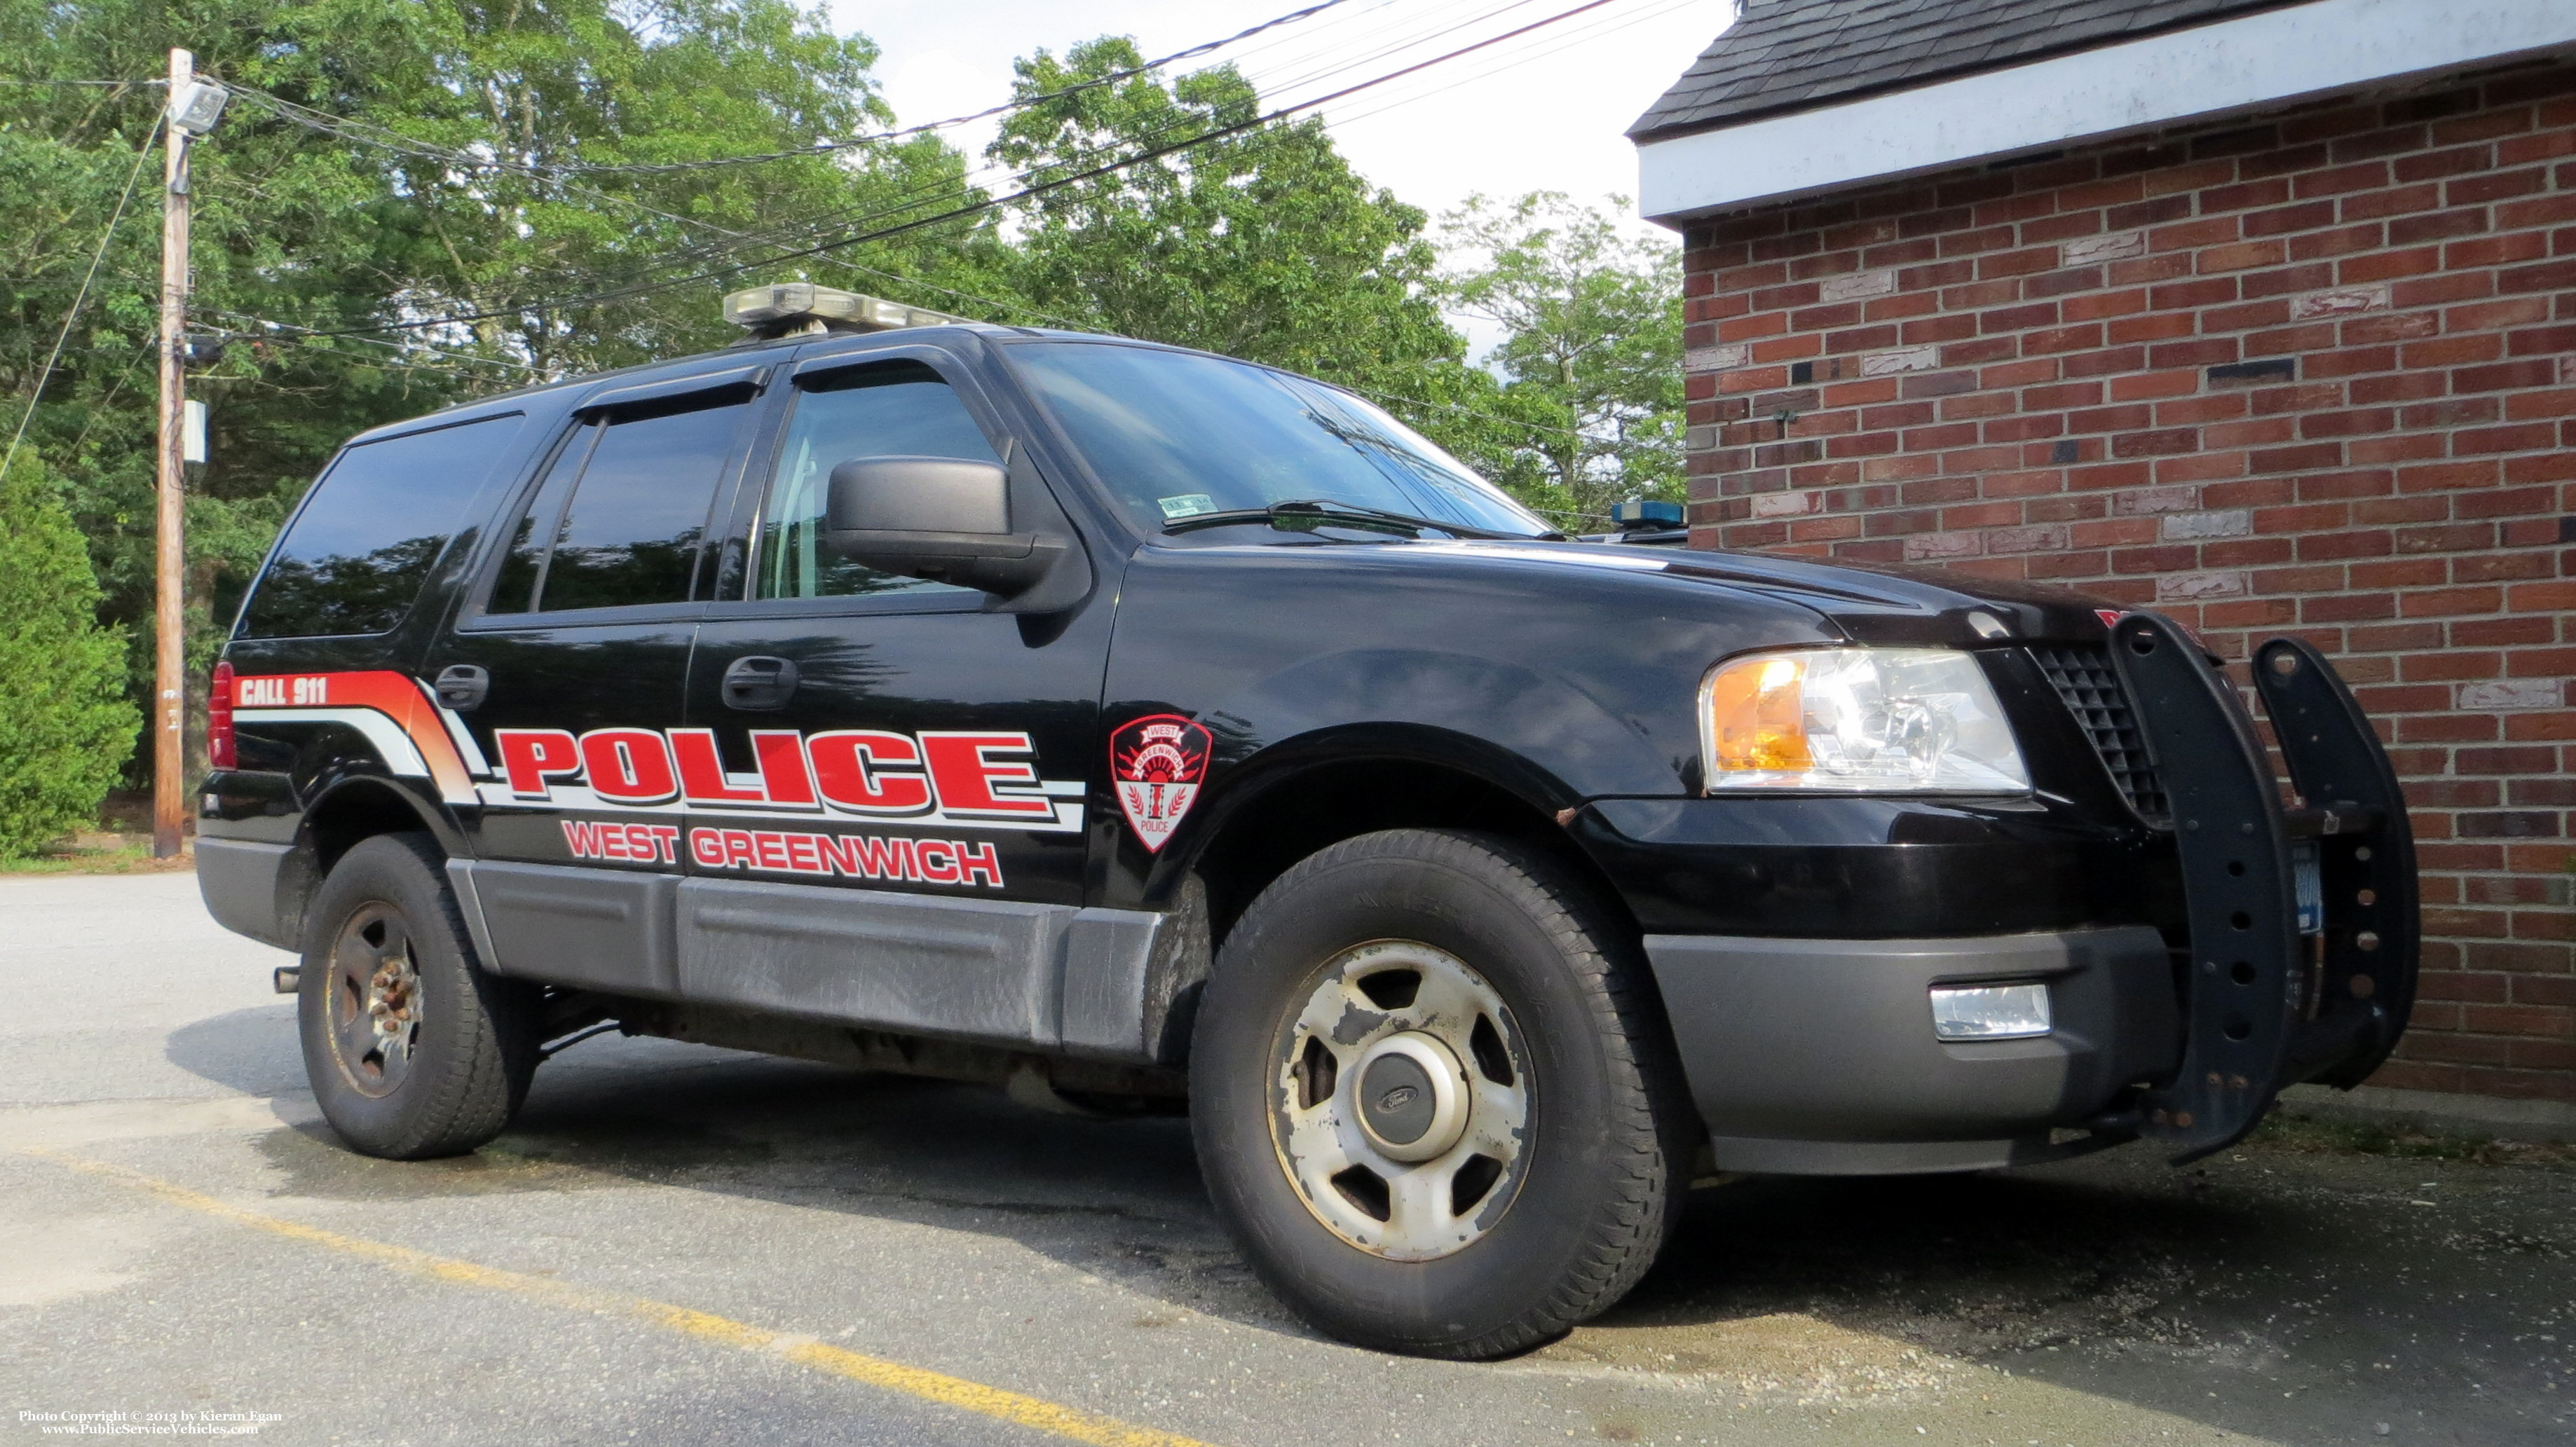 A photo  of West Greenwich Police
            Cruiser 3800, a 2004 Ford Expedition             taken by Kieran Egan